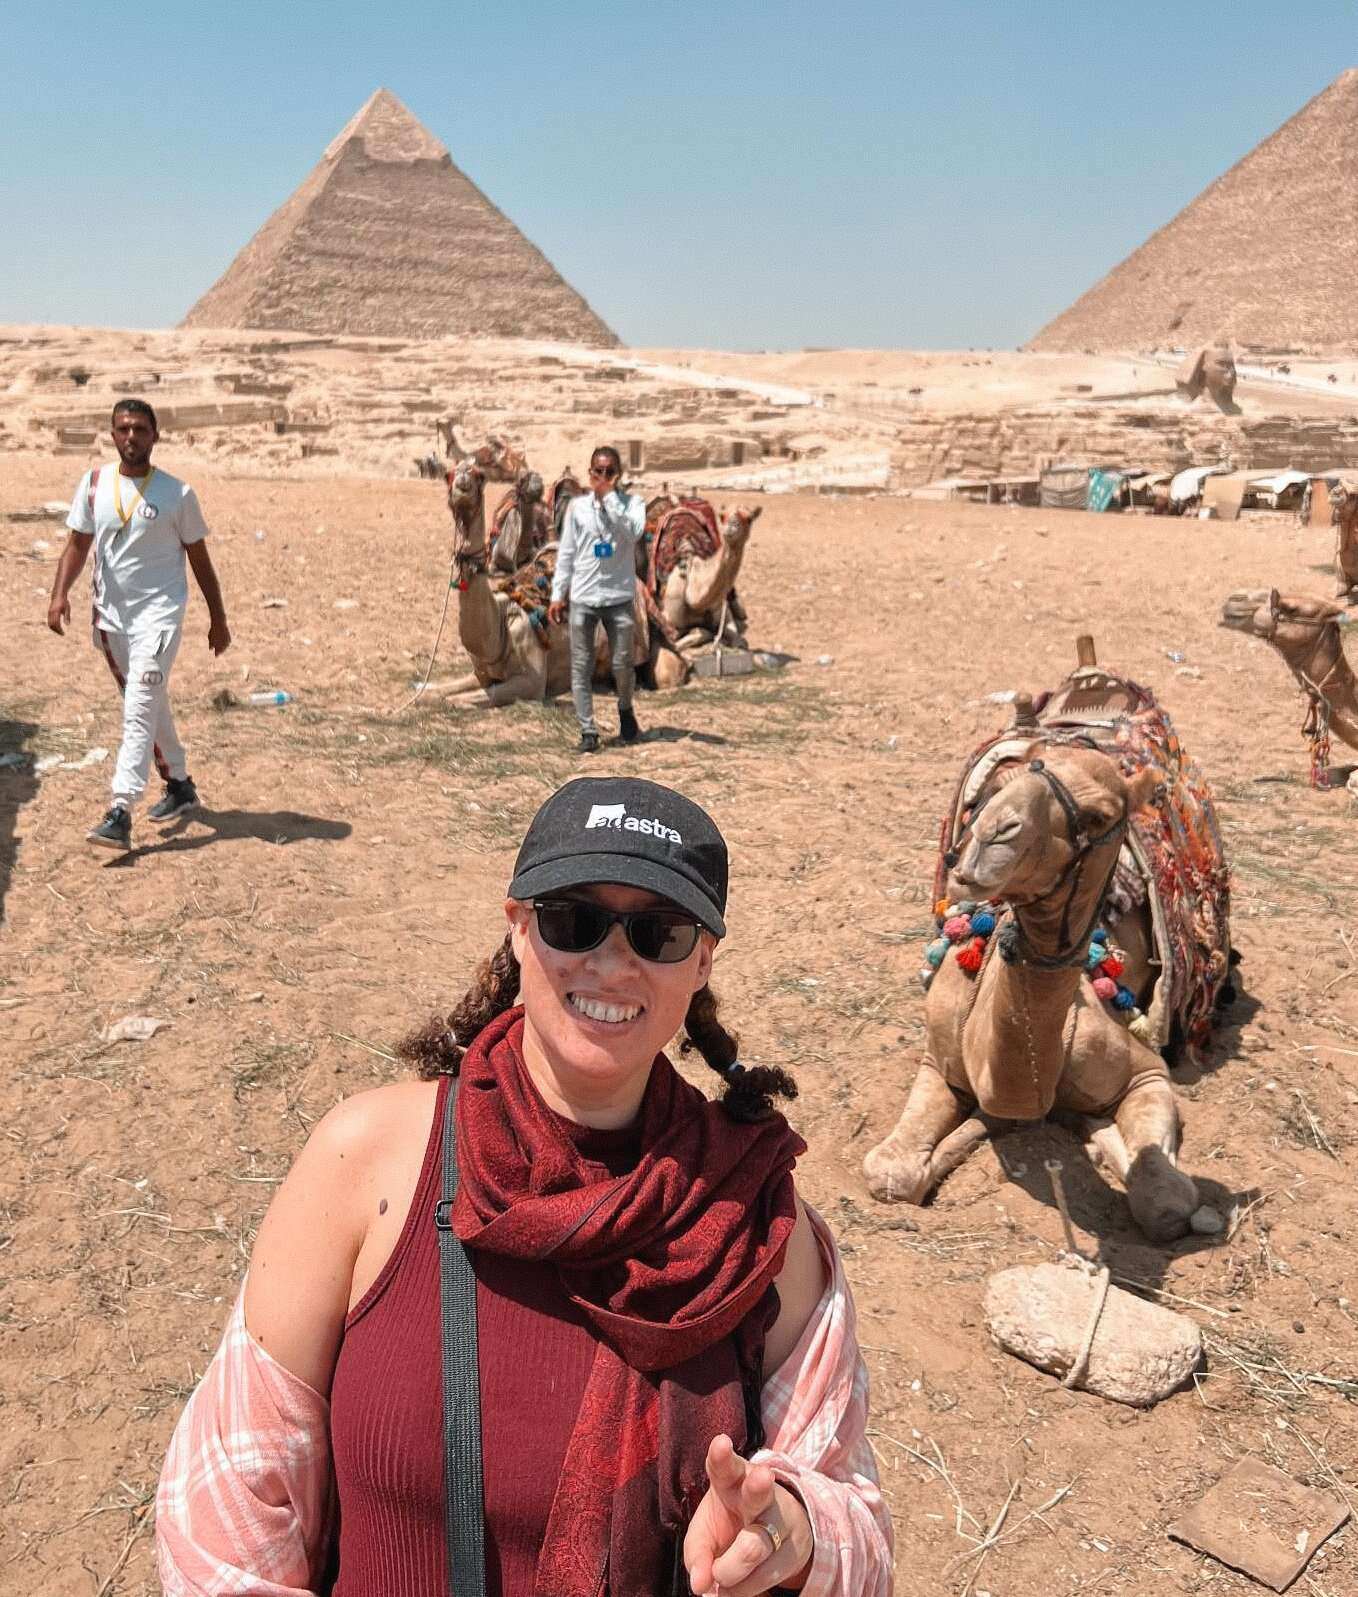 A woman taking a photo in front of the pyramids